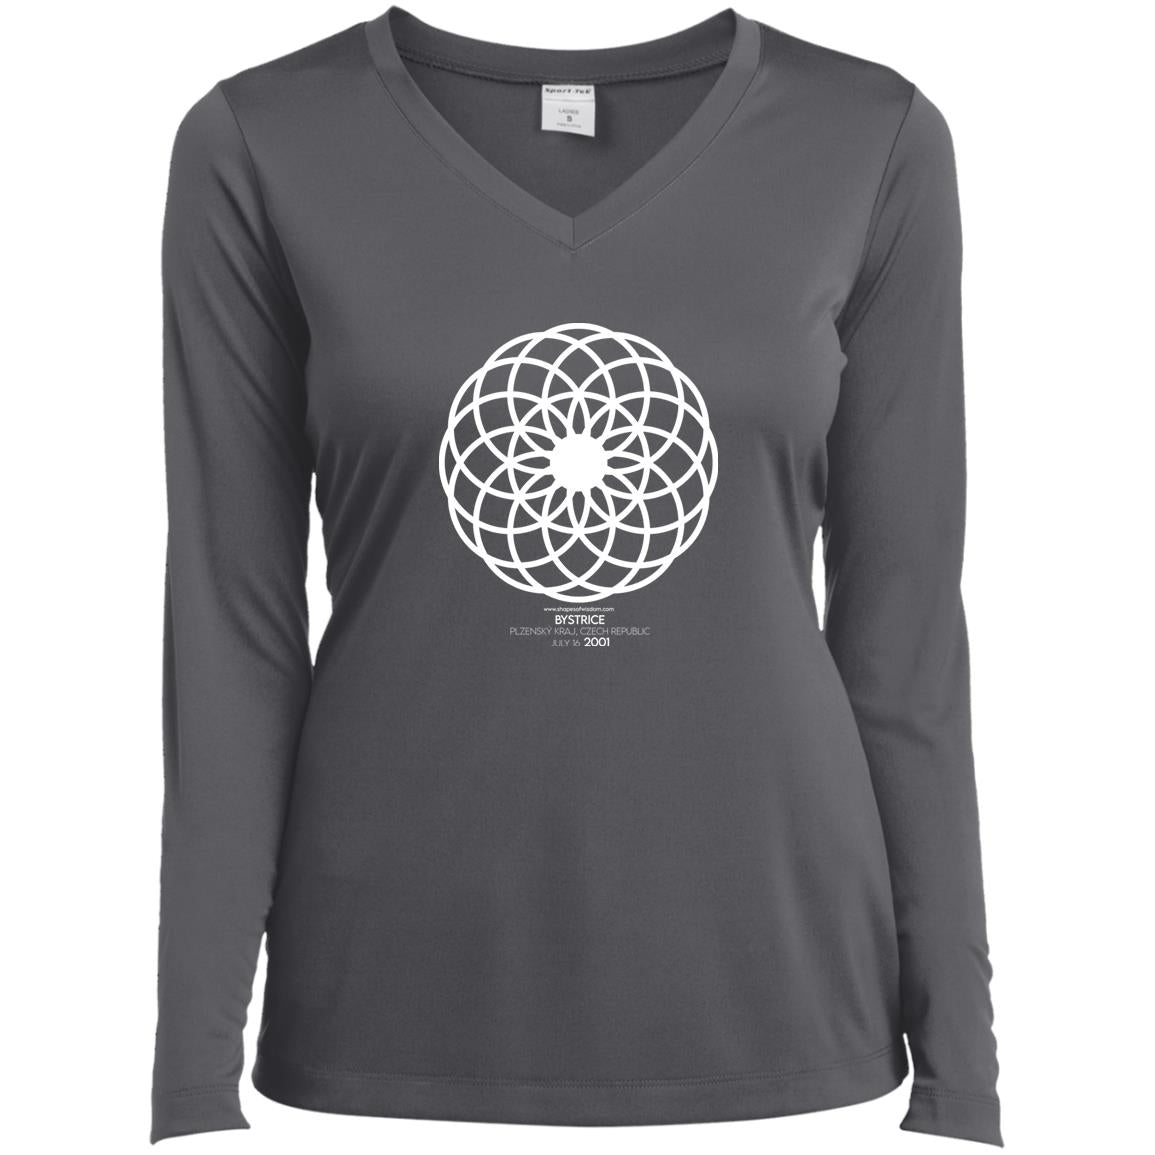 Crop Circle V-Neck Tee - Bystrice